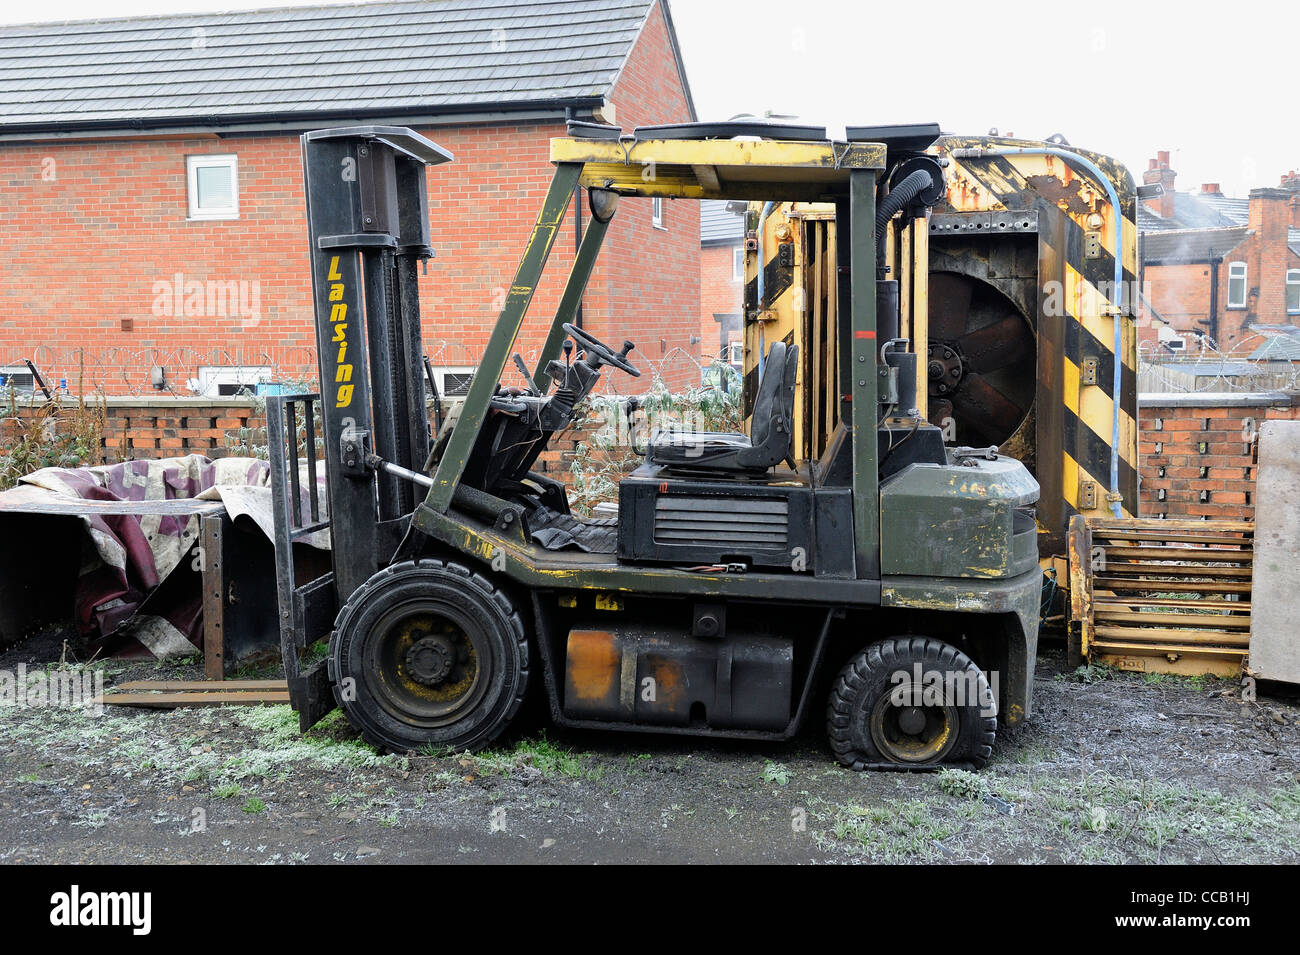 lansing bagnall fork lift truck with flat tyre england uk Stock Photo